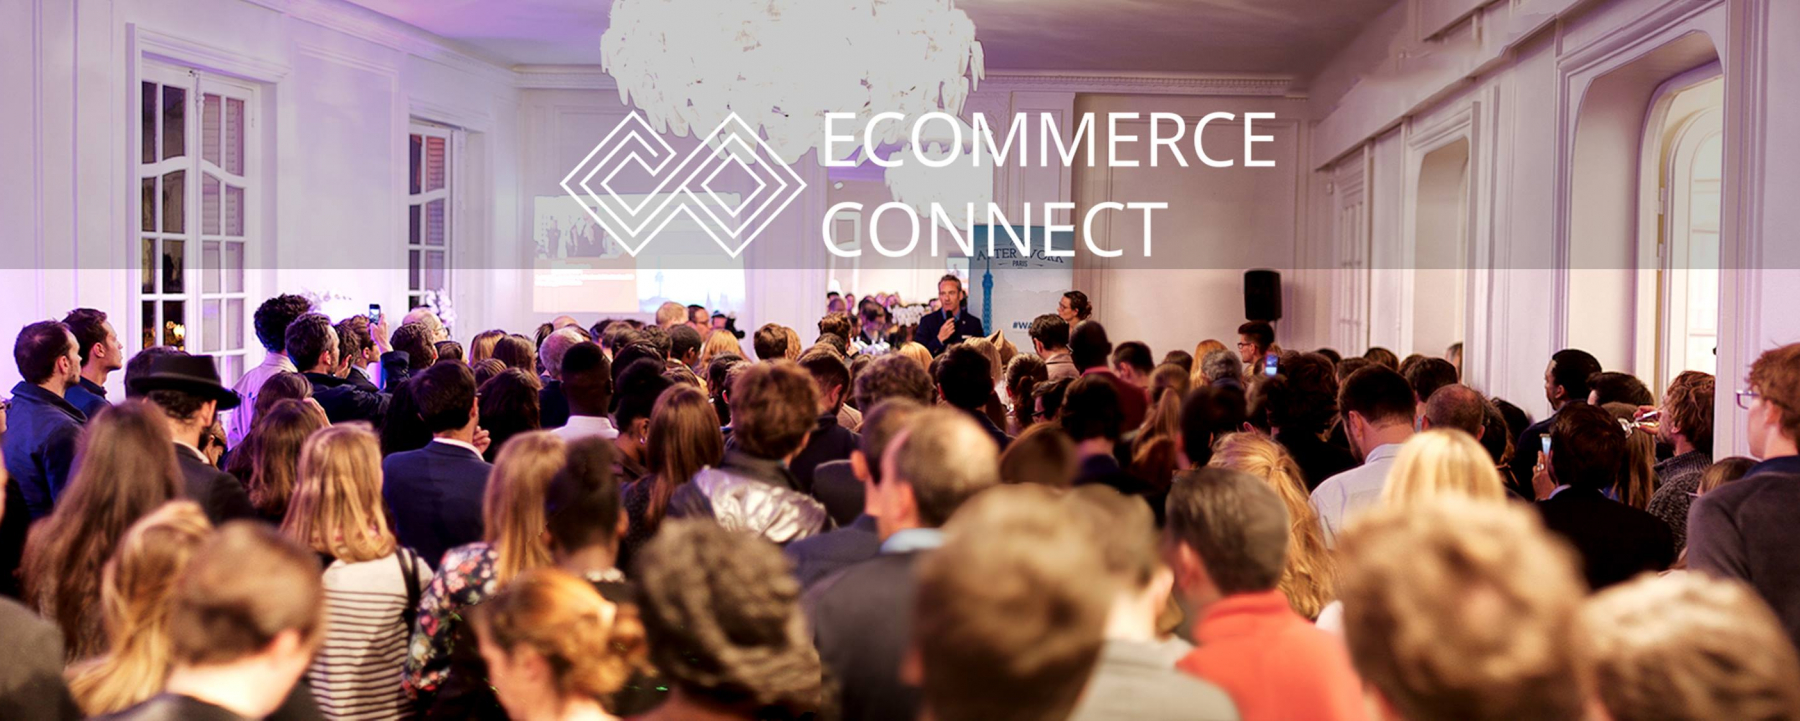 ecommerce connect